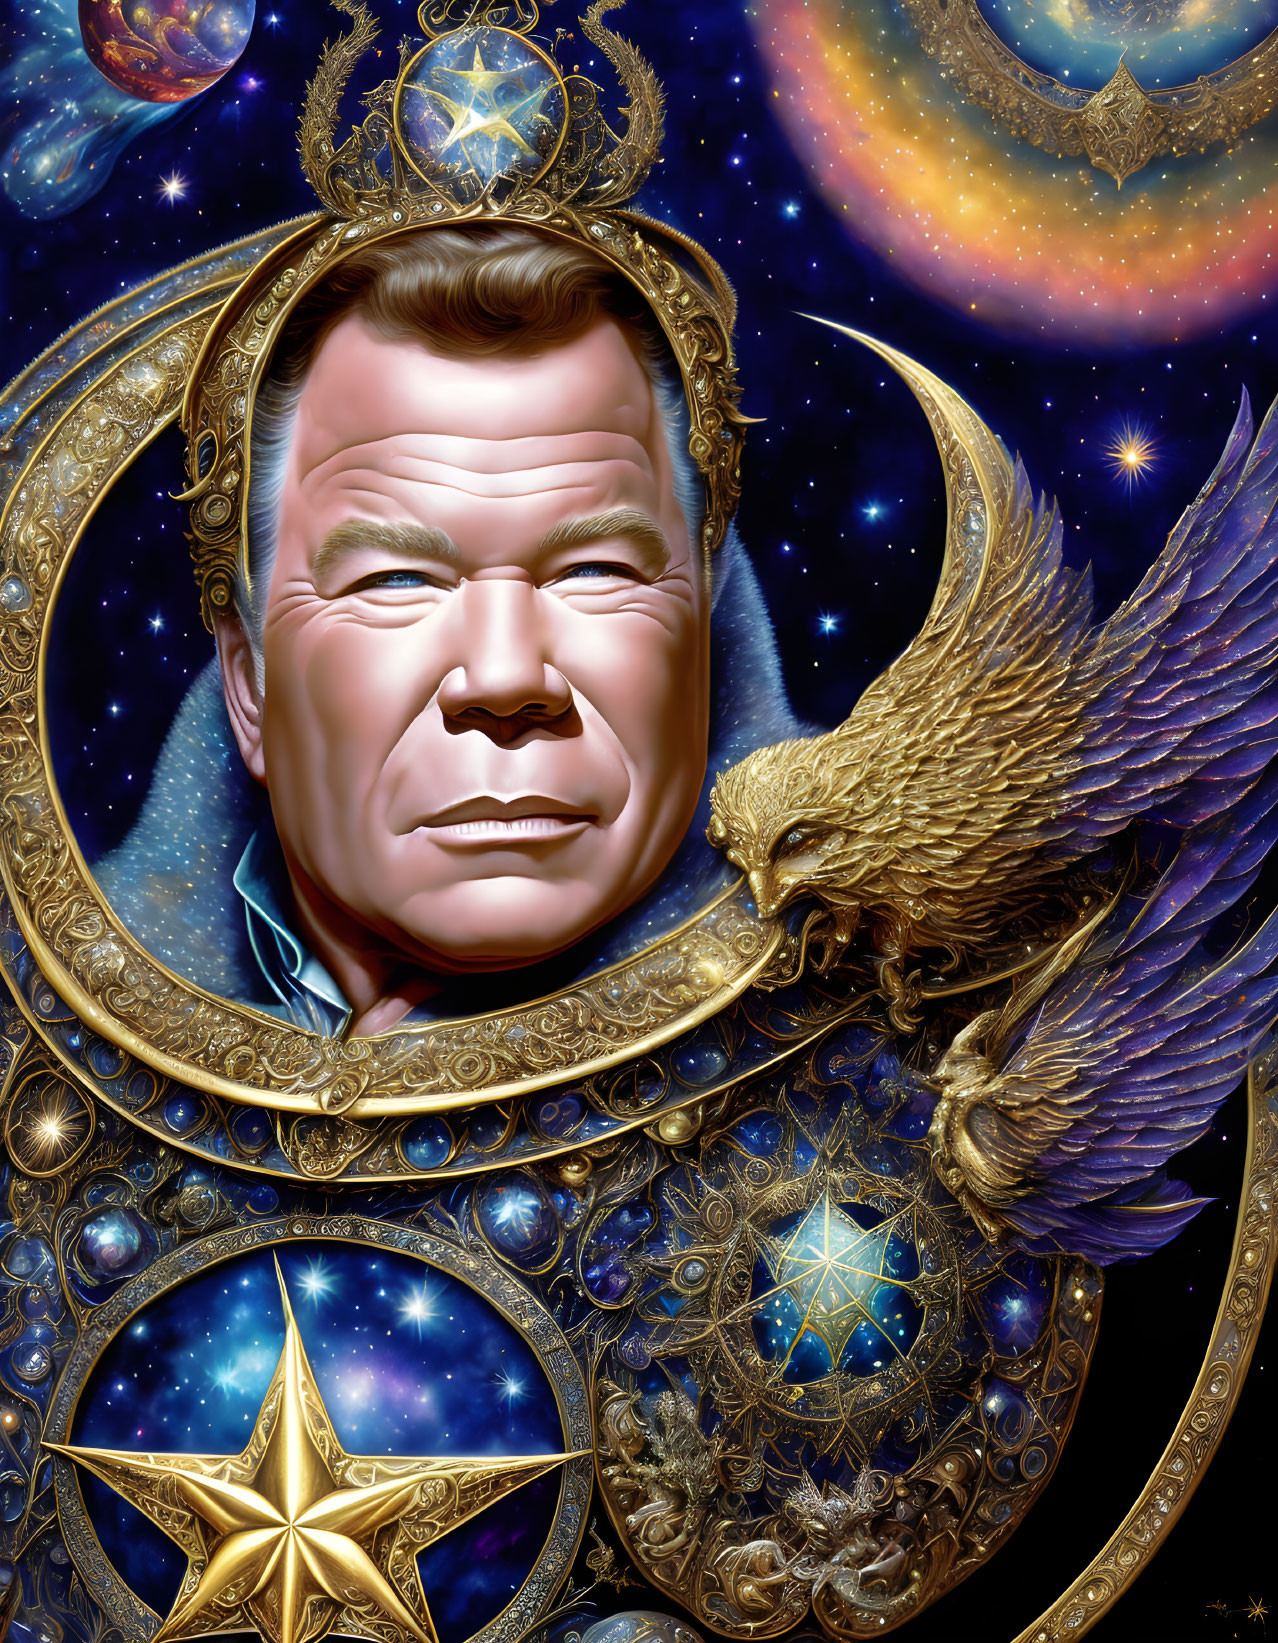 Man's face in surreal portrait with celestial background, golden frameworks, and eagle.